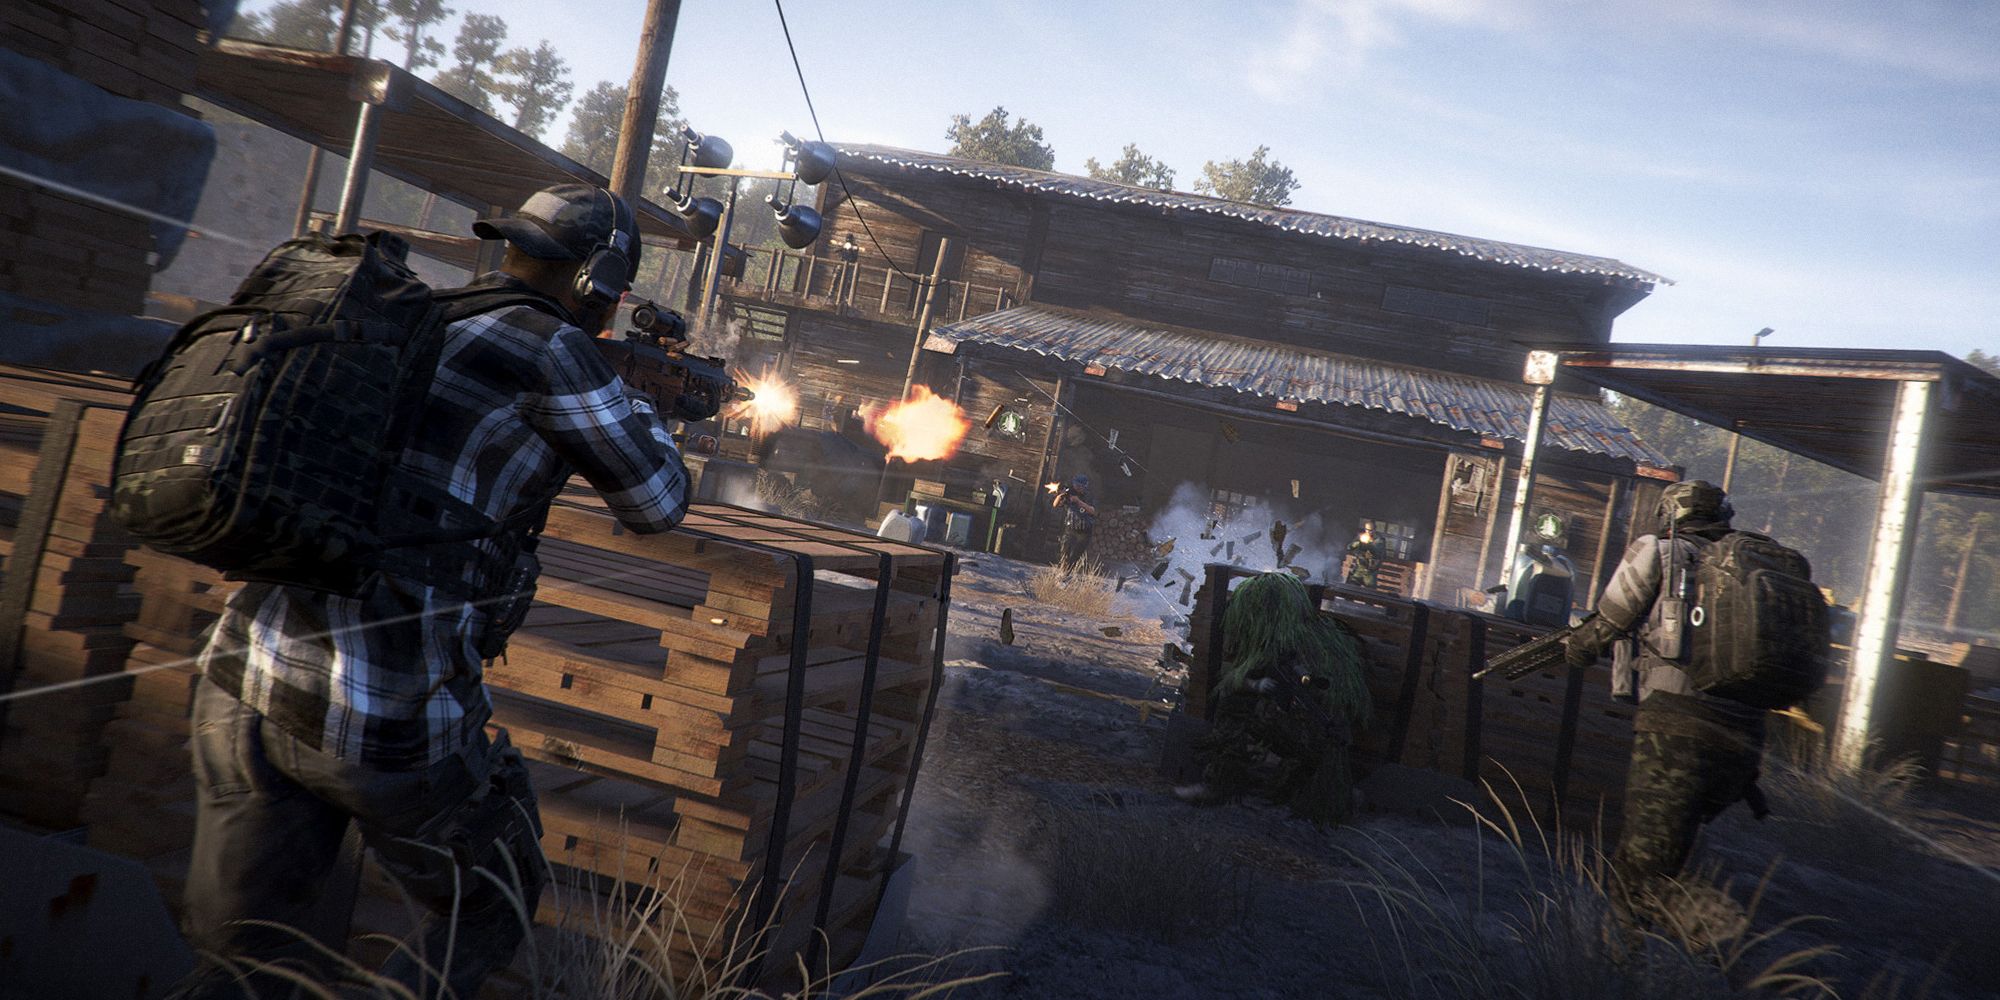 Ghost Recon Wildlands. Characters aiming at the enemies up ahead. Boxes and wooden planks provided as cover.